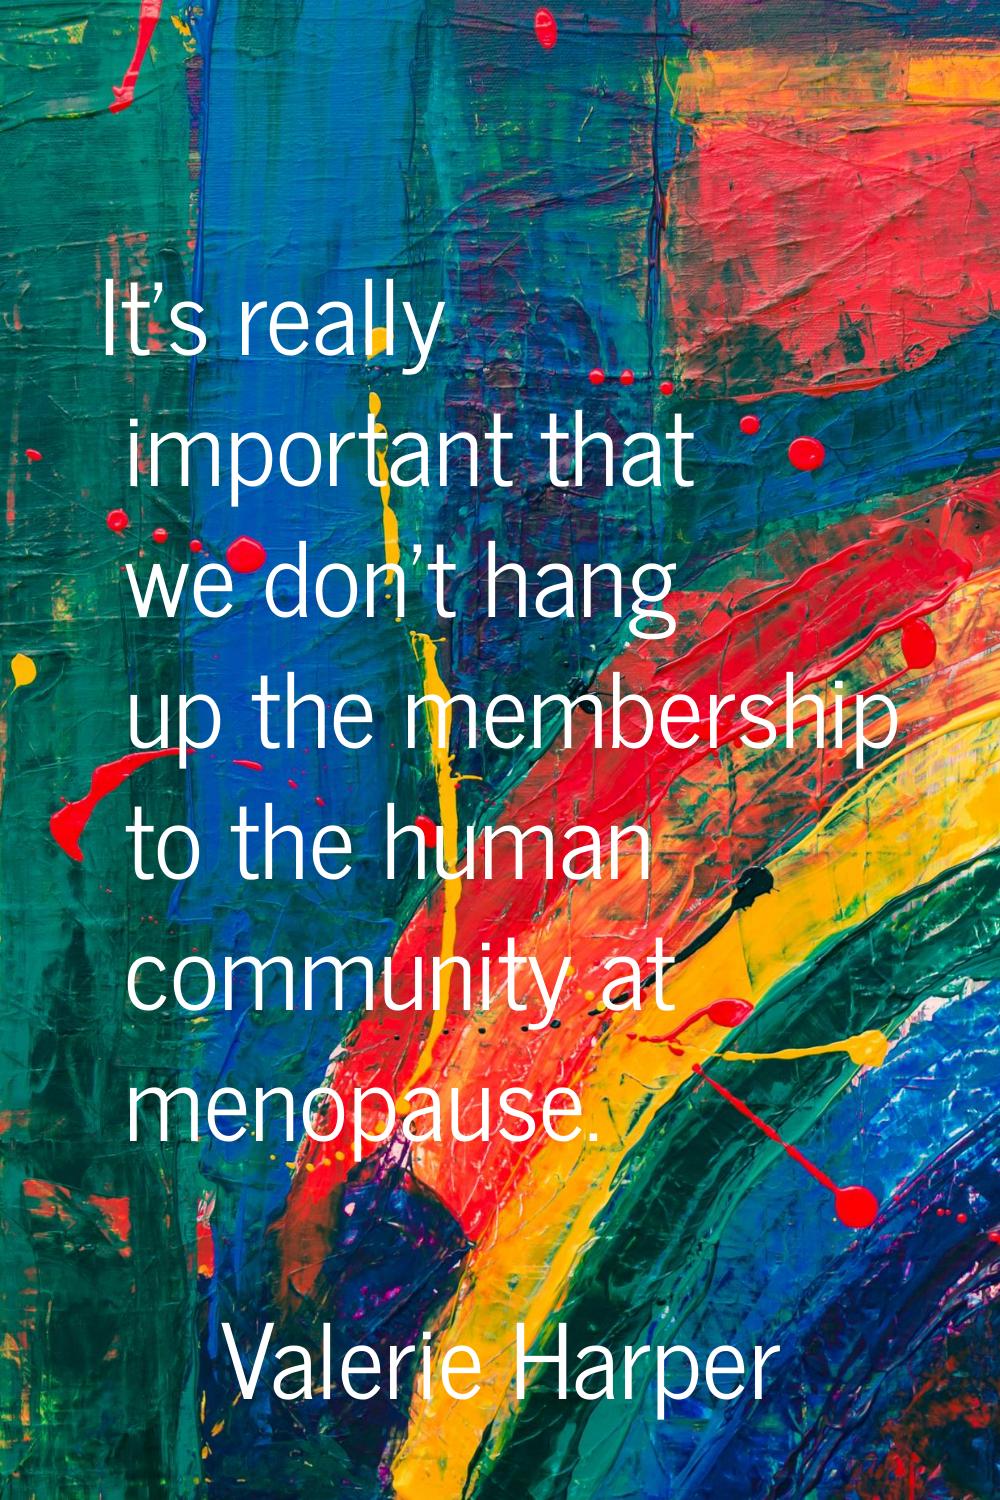 It's really important that we don't hang up the membership to the human community at menopause.